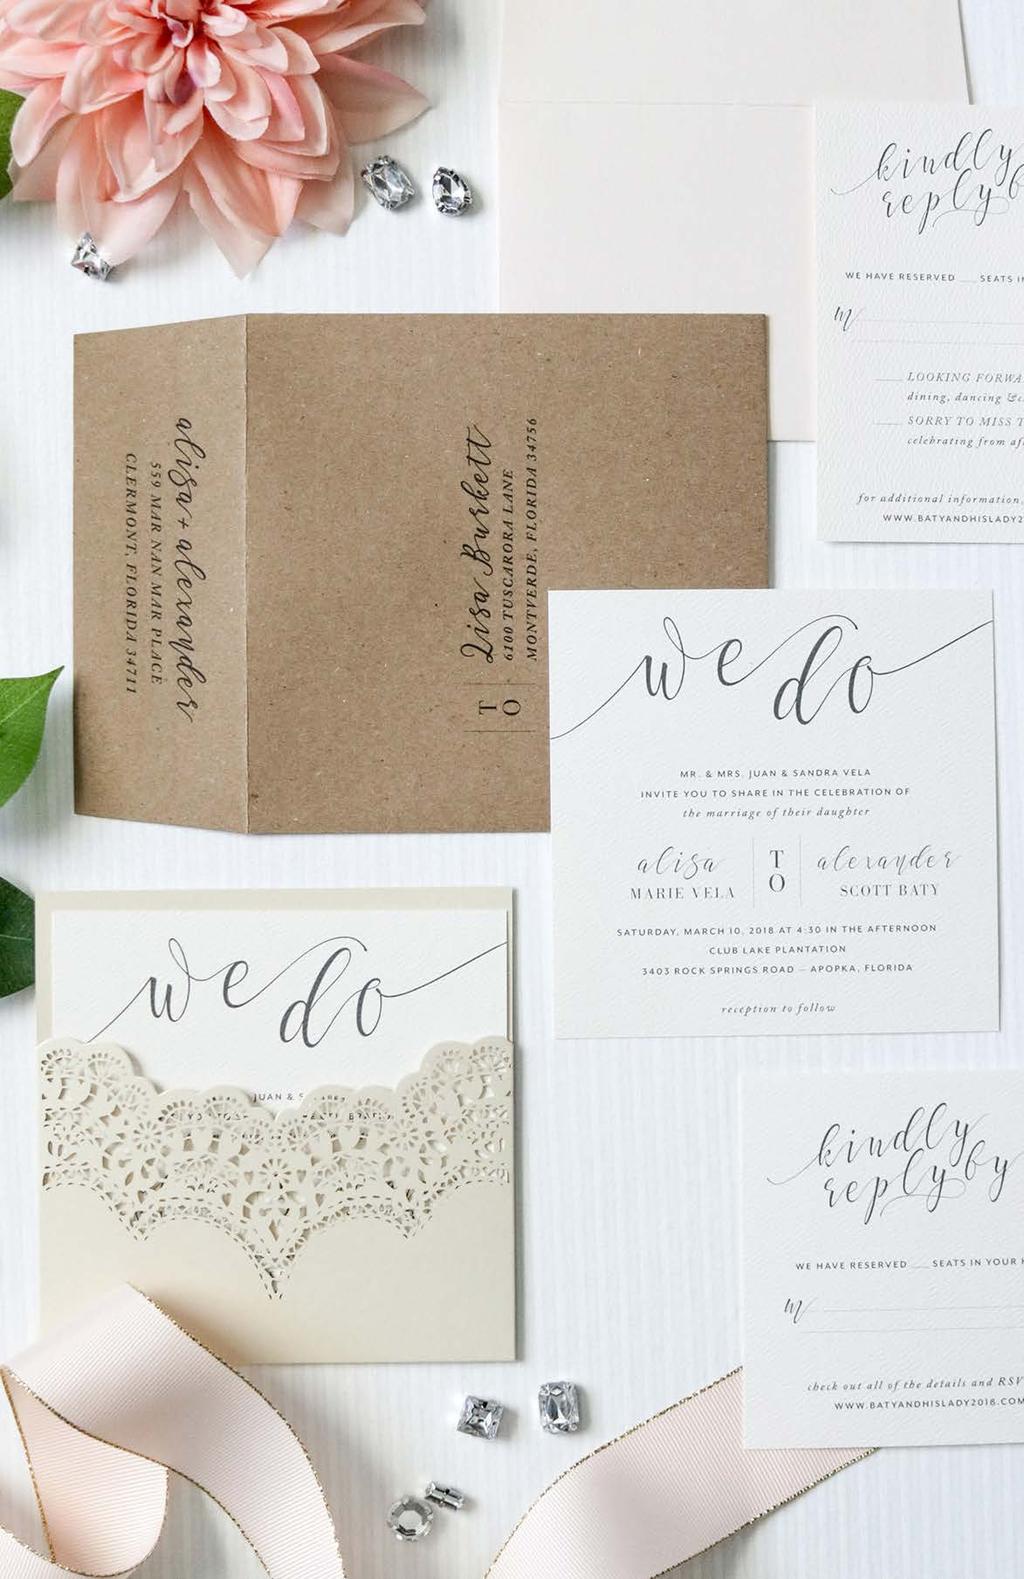 PAPER OPTIONS All cards are digitally printed on our signature white 118lb Cotton paper smooth white FREE vellum transparent $0.75 subtle eggshell FREE double-thick eggshell $1.